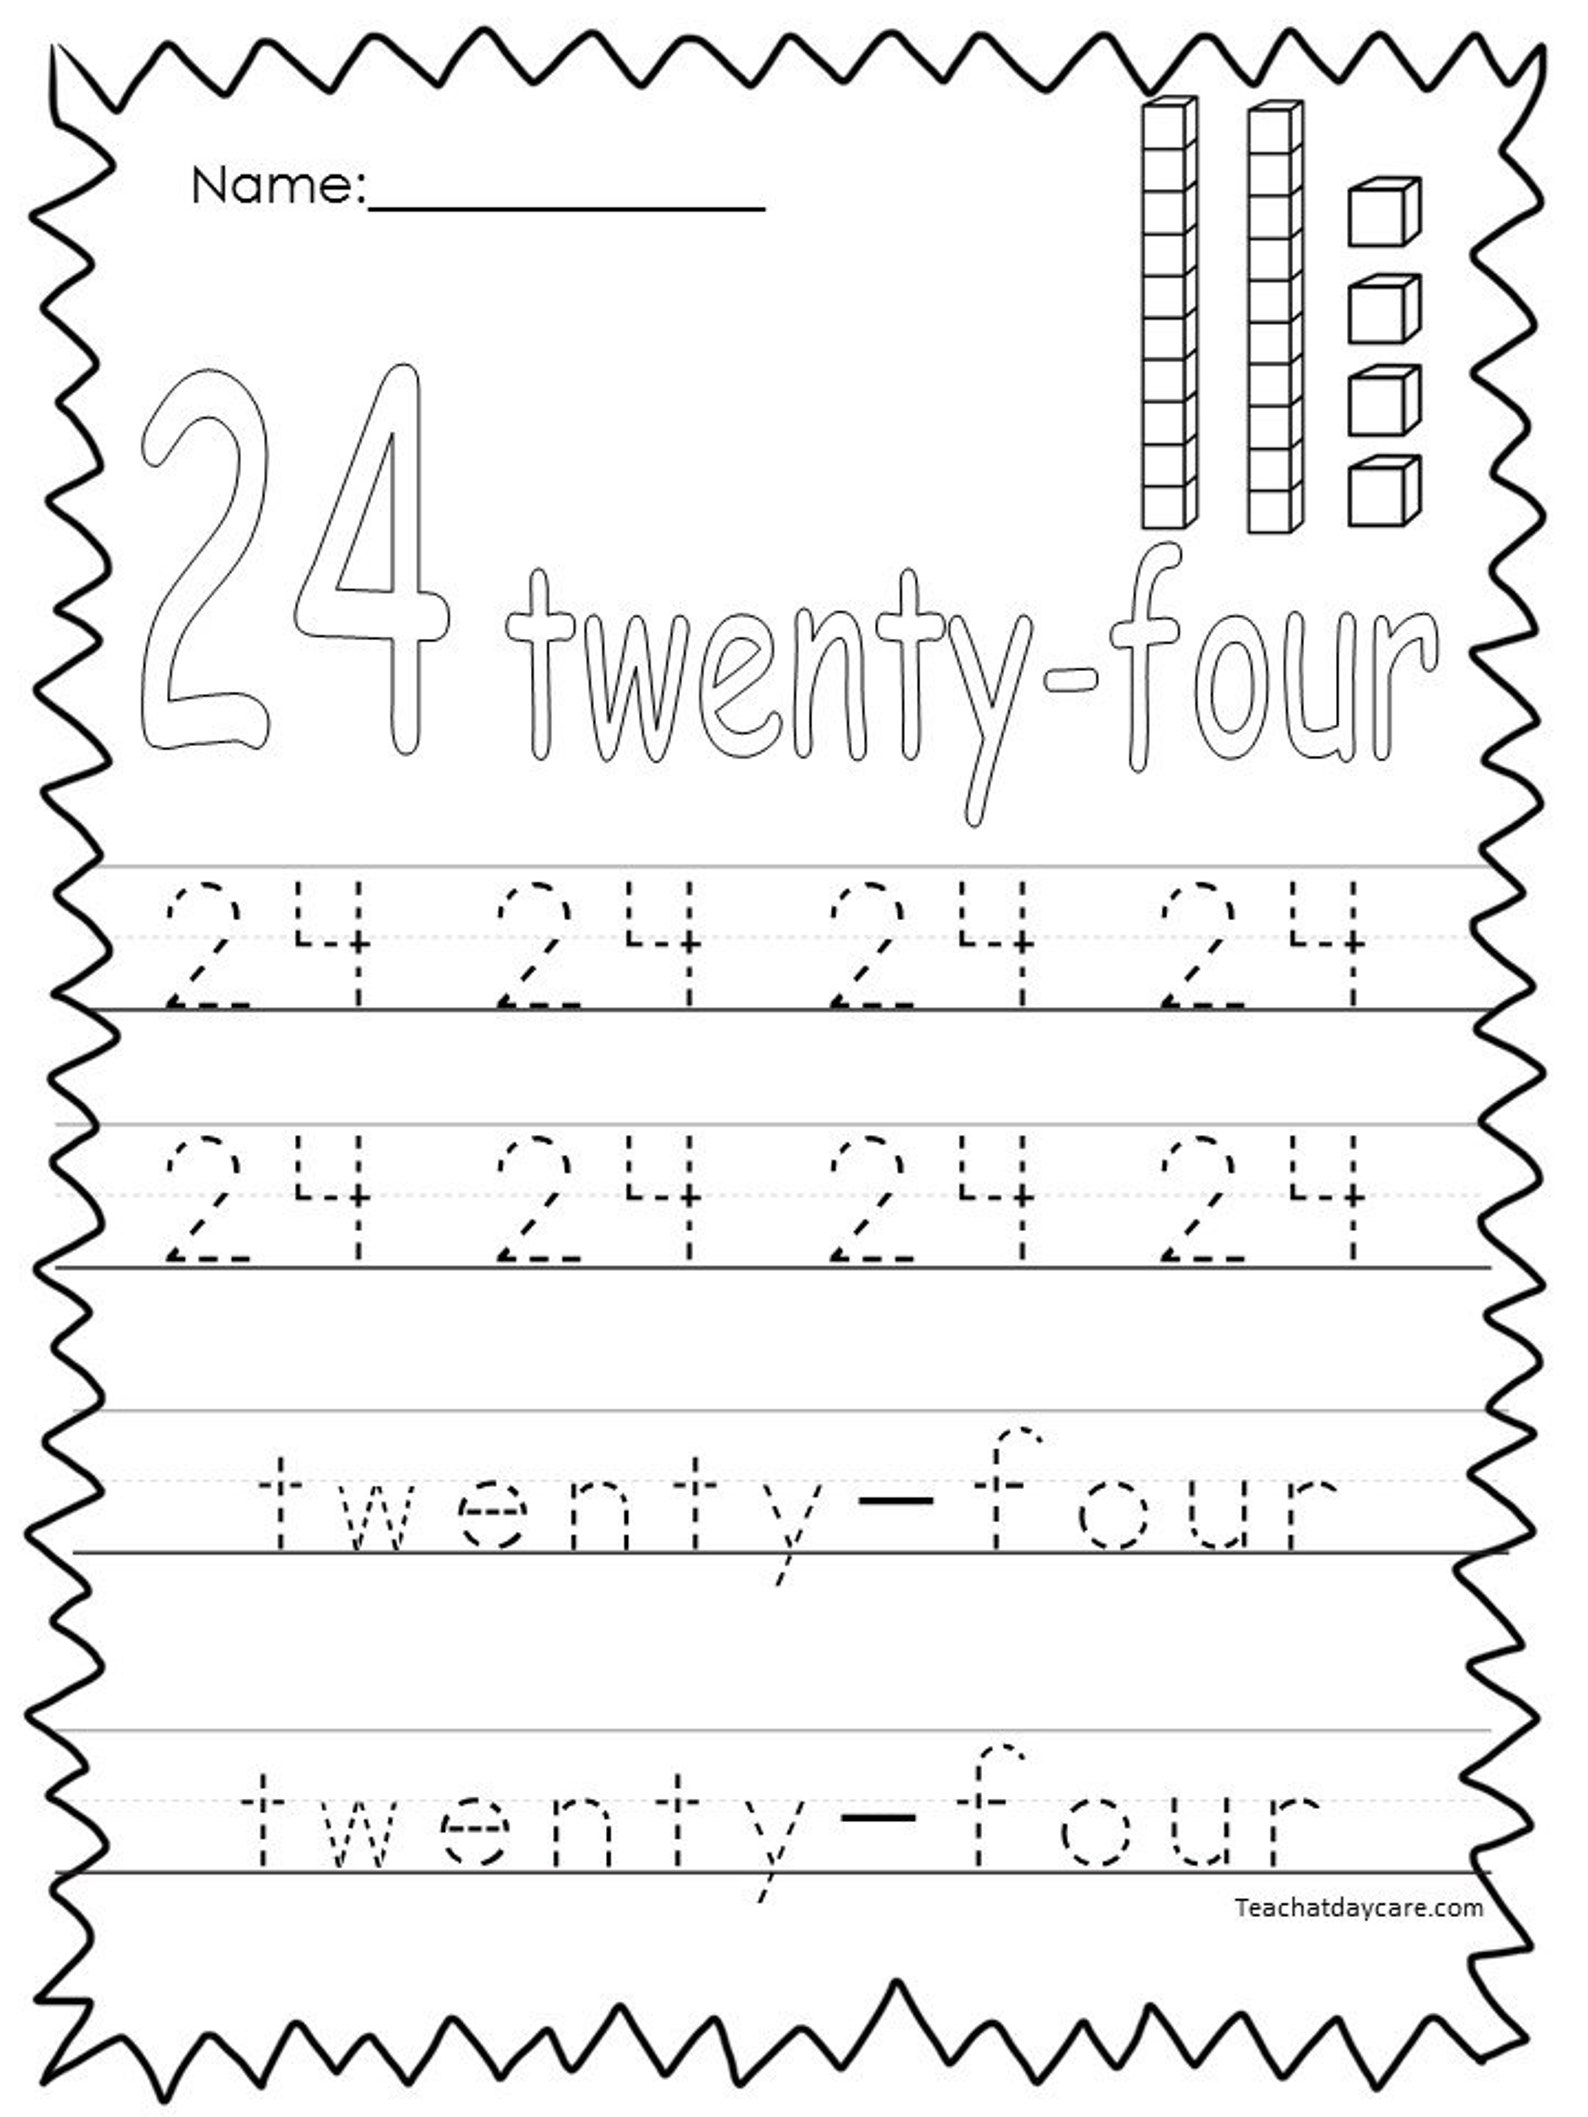 10-printable-numbers-21-30-tracing-worksheets-etsy-canada